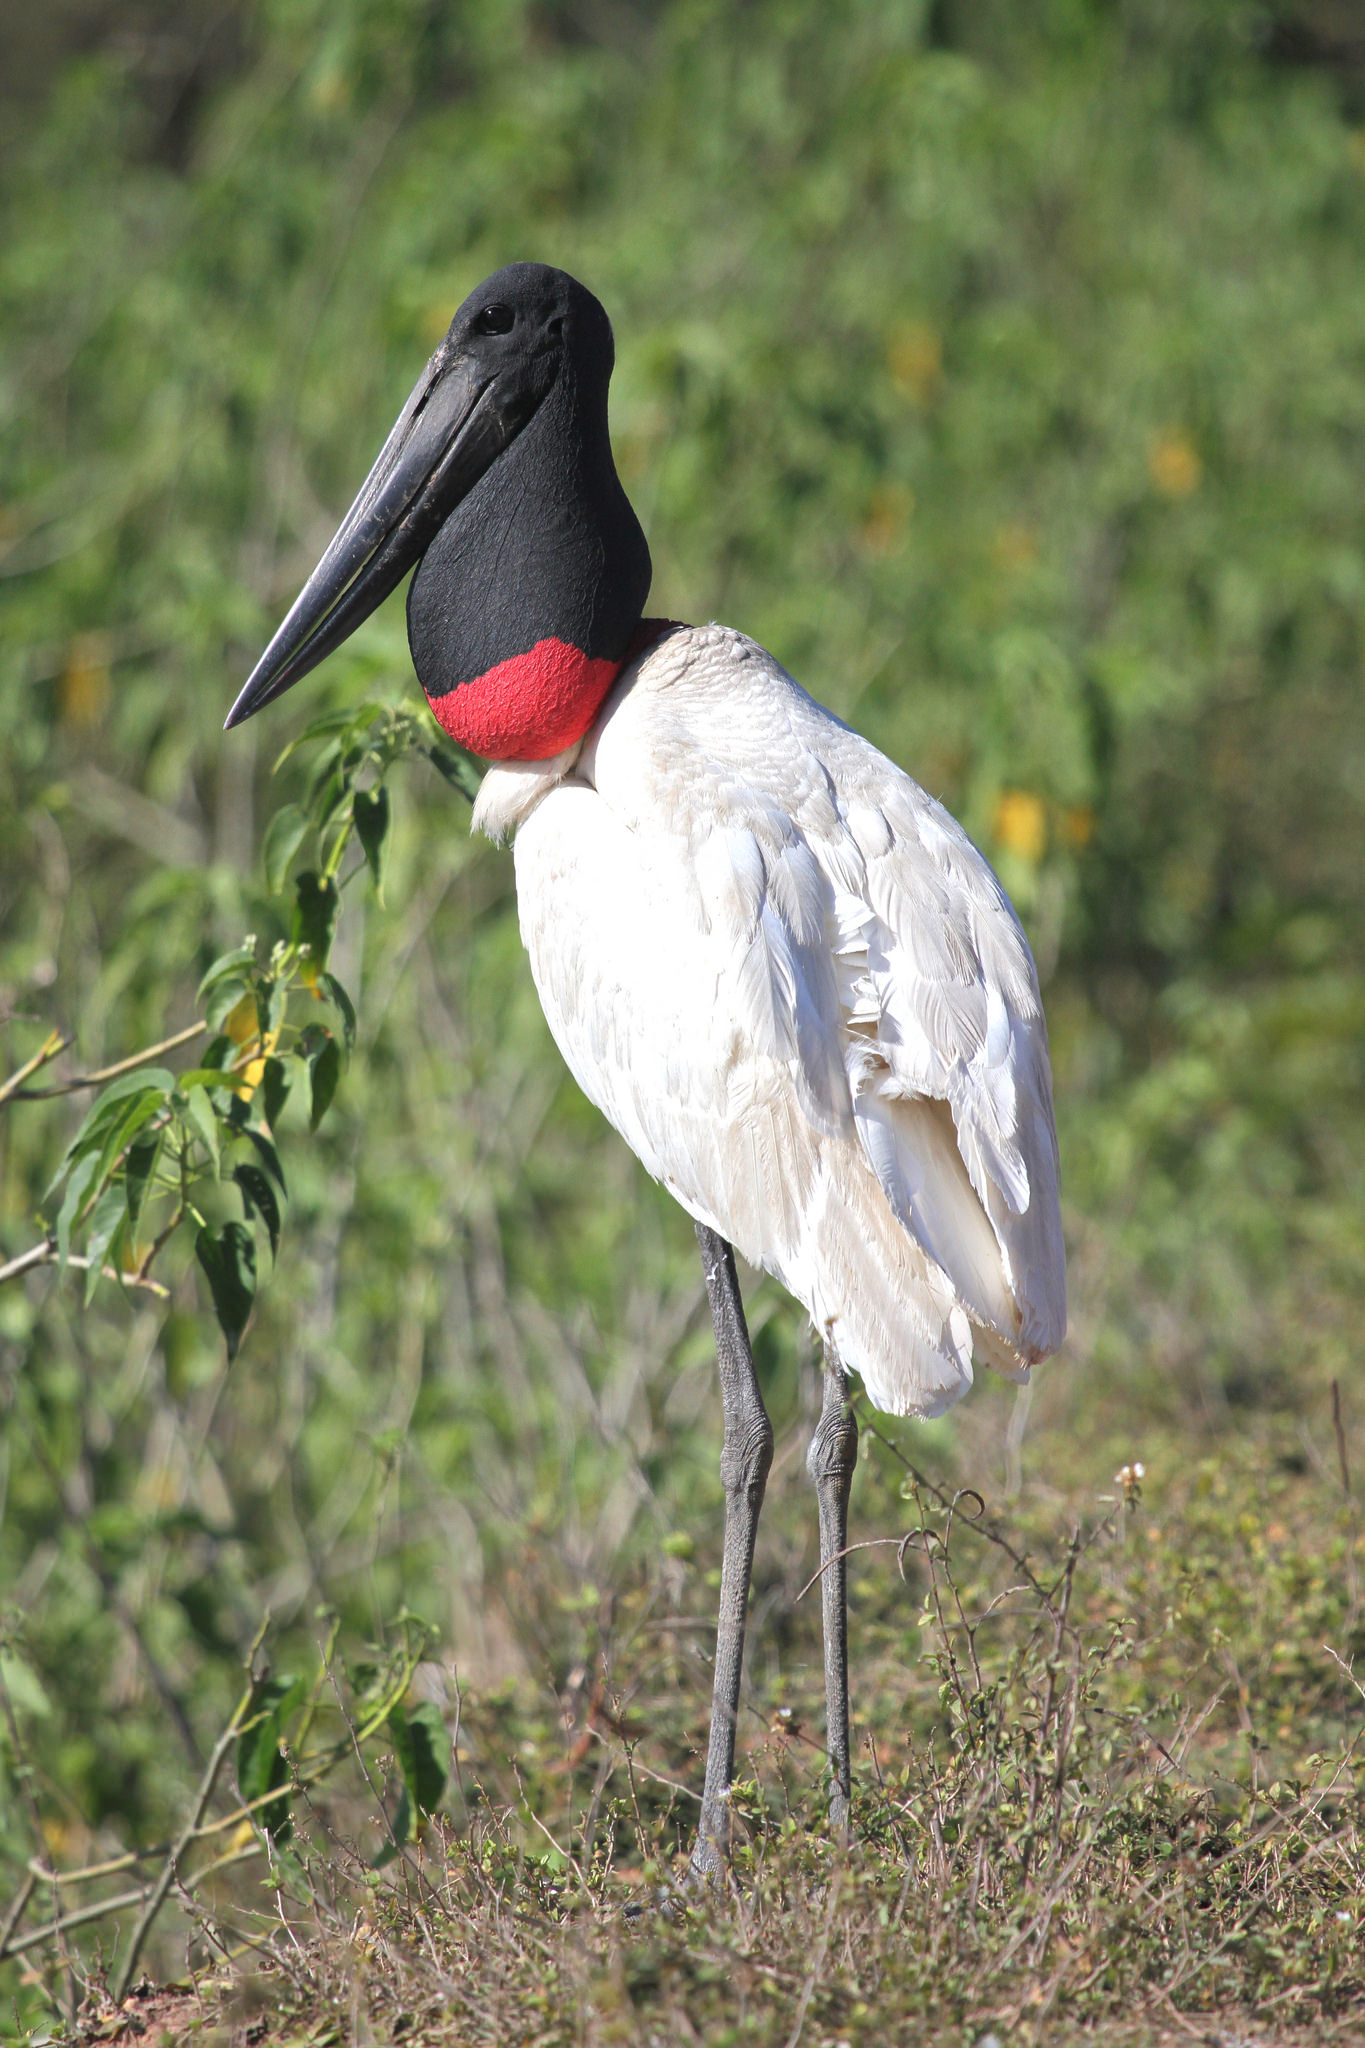 Guyana travel offers the opportunity to see Jabiru, a giant stork